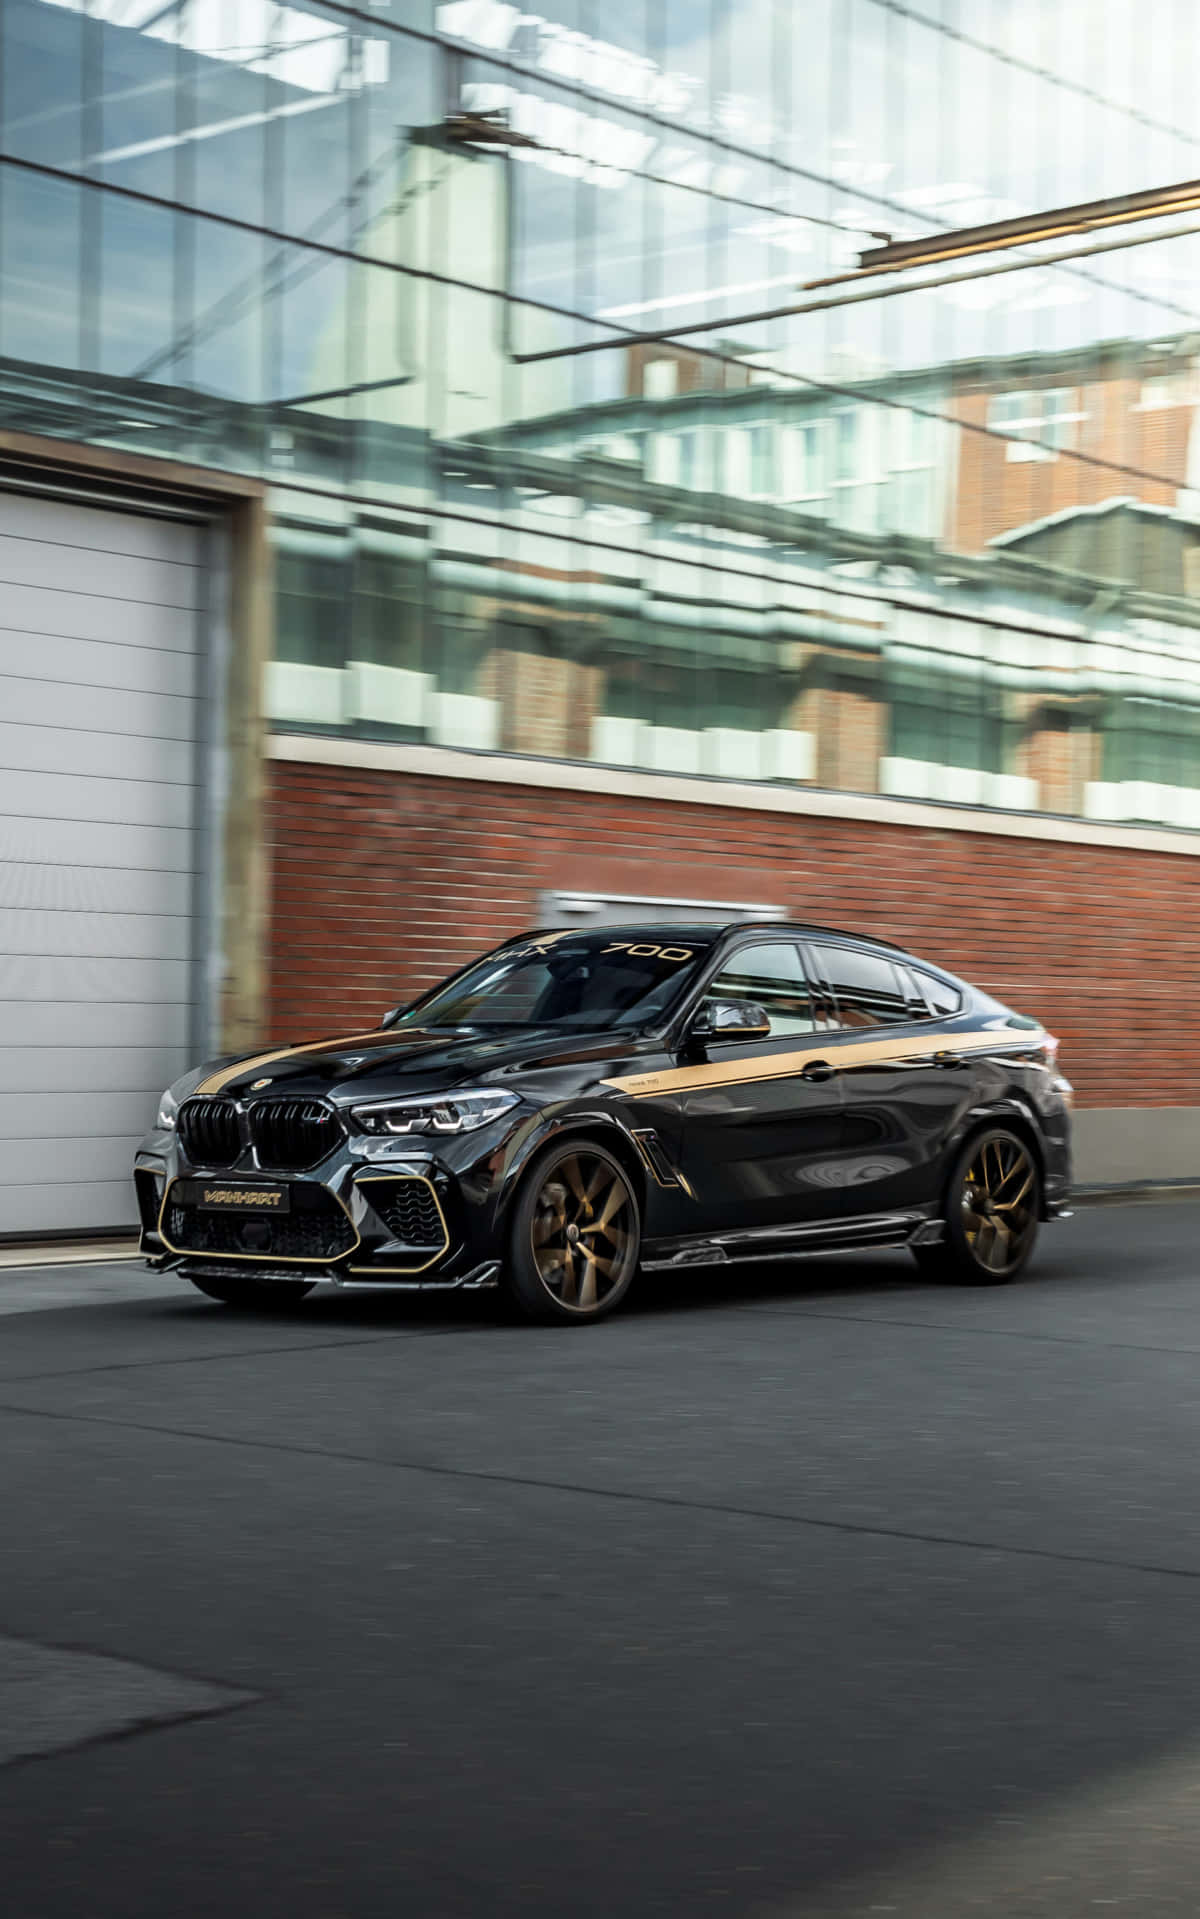 The jaw-dropping power of the BMW X6 M